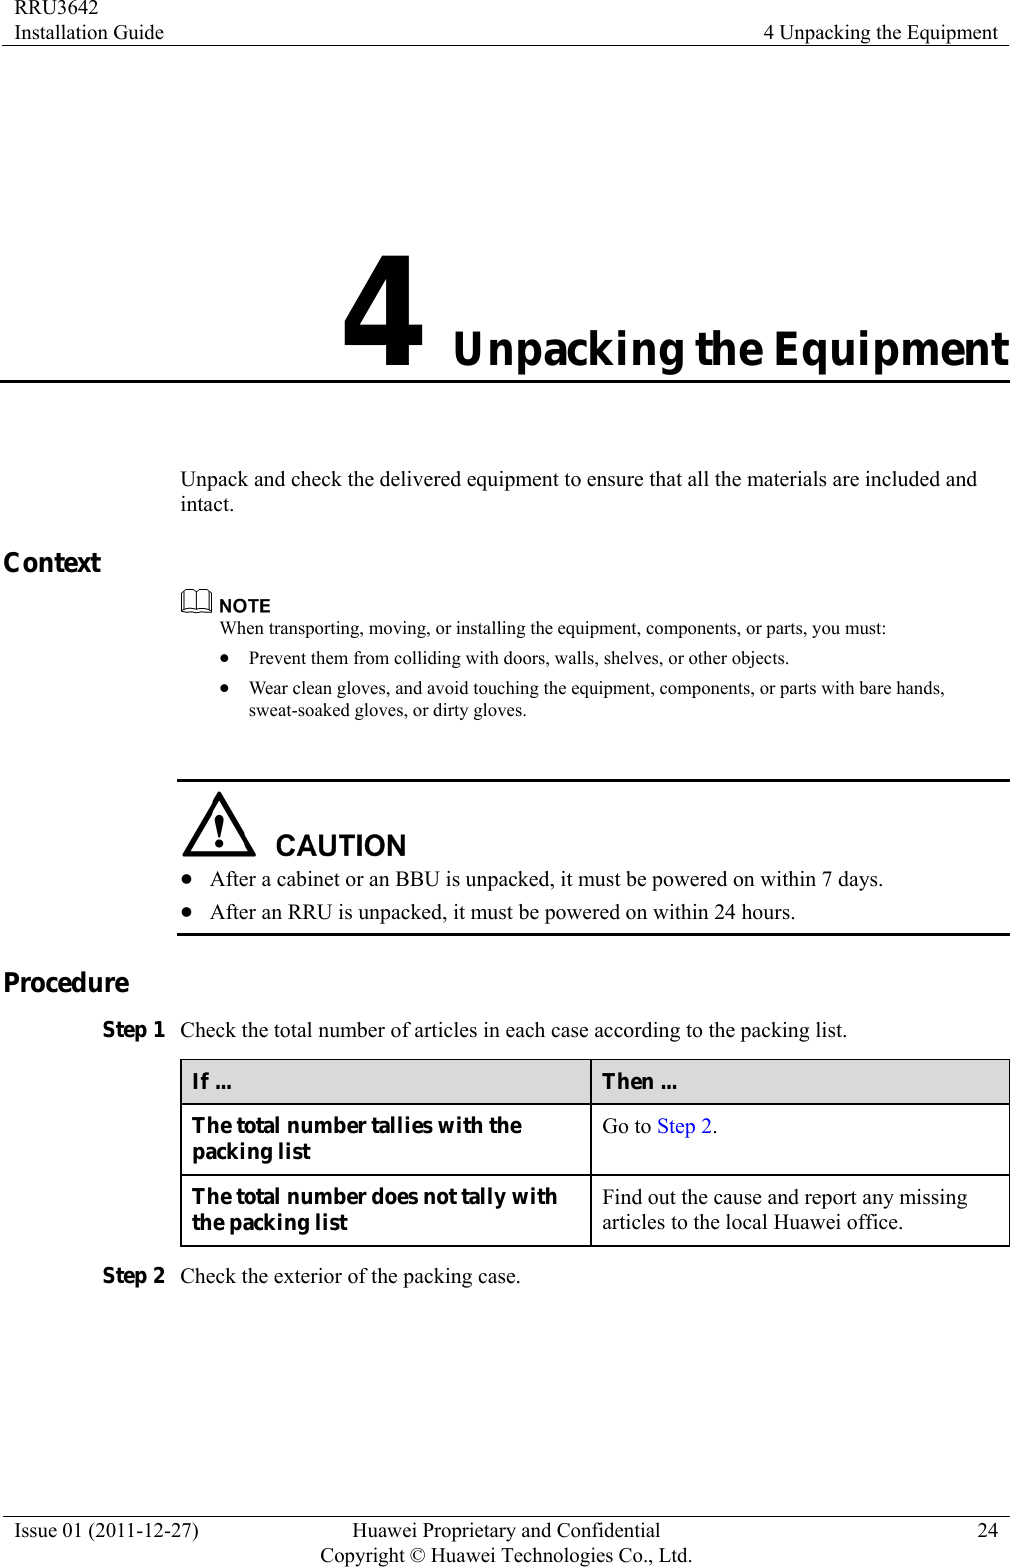 RRU3642 Installation Guide  4 Unpacking the Equipment Issue 01 (2011-12-27)  Huawei Proprietary and Confidential         Copyright © Huawei Technologies Co., Ltd.24 4 Unpacking the Equipment Unpack and check the delivered equipment to ensure that all the materials are included and intact. Context  When transporting, moving, or installing the equipment, components, or parts, you must: z Prevent them from colliding with doors, walls, shelves, or other objects. z Wear clean gloves, and avoid touching the equipment, components, or parts with bare hands, sweat-soaked gloves, or dirty gloves.   z After a cabinet or an BBU is unpacked, it must be powered on within 7 days.   z After an RRU is unpacked, it must be powered on within 24 hours.   Procedure Step 1 Check the total number of articles in each case according to the packing list. If ...  Then ... The total number tallies with the packing list  Go to Step 2. The total number does not tally with the packing list  Find out the cause and report any missing articles to the local Huawei office. Step 2 Check the exterior of the packing case. 